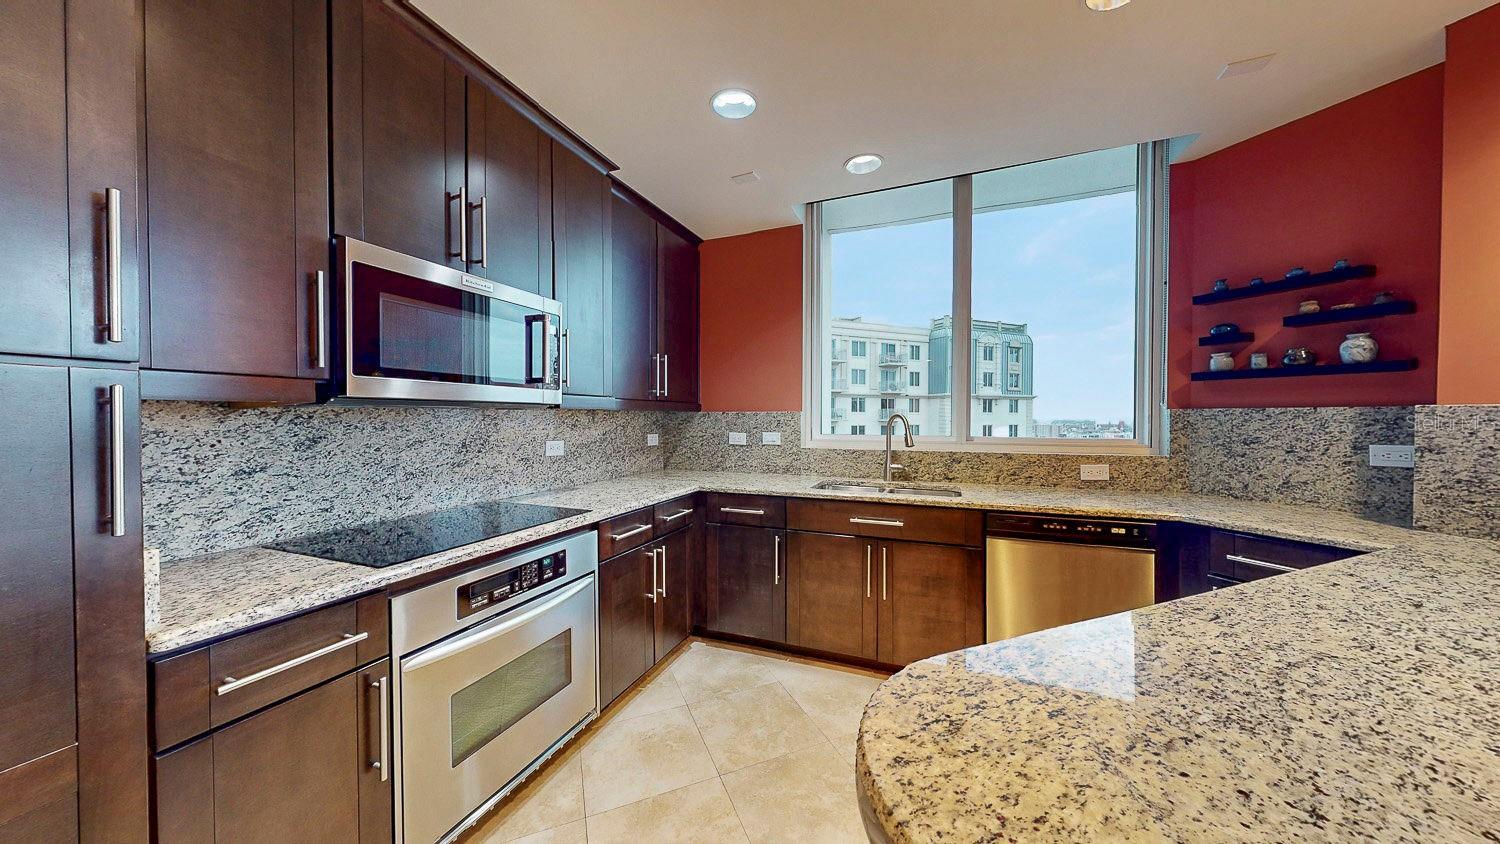 The kitchen offers a generous amount of space.